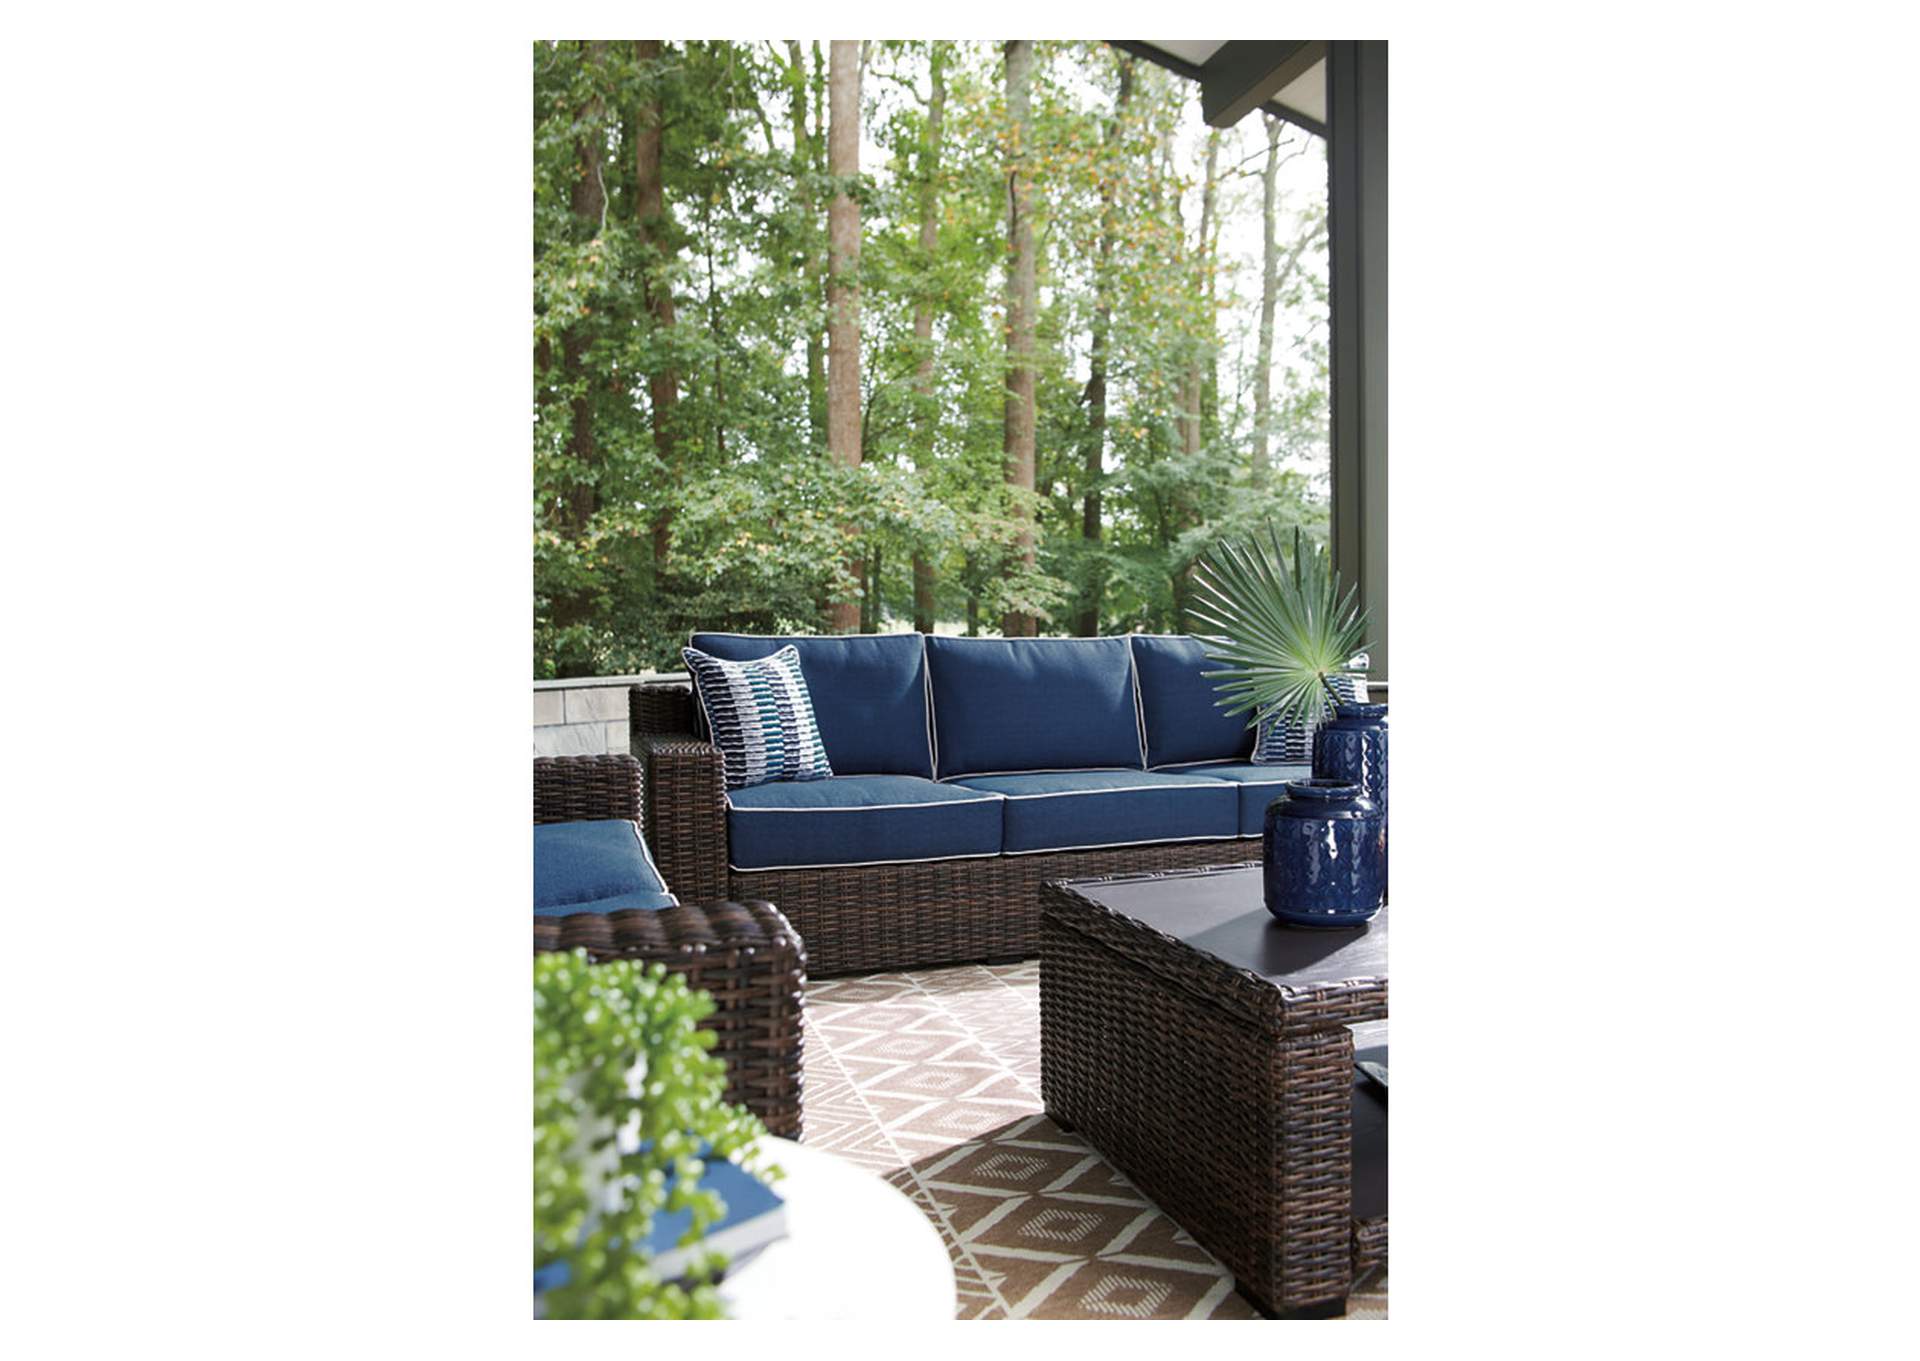 Grasson Lane Outdoor Sofa and Loveseat with Coffee Table,Outdoor By Ashley